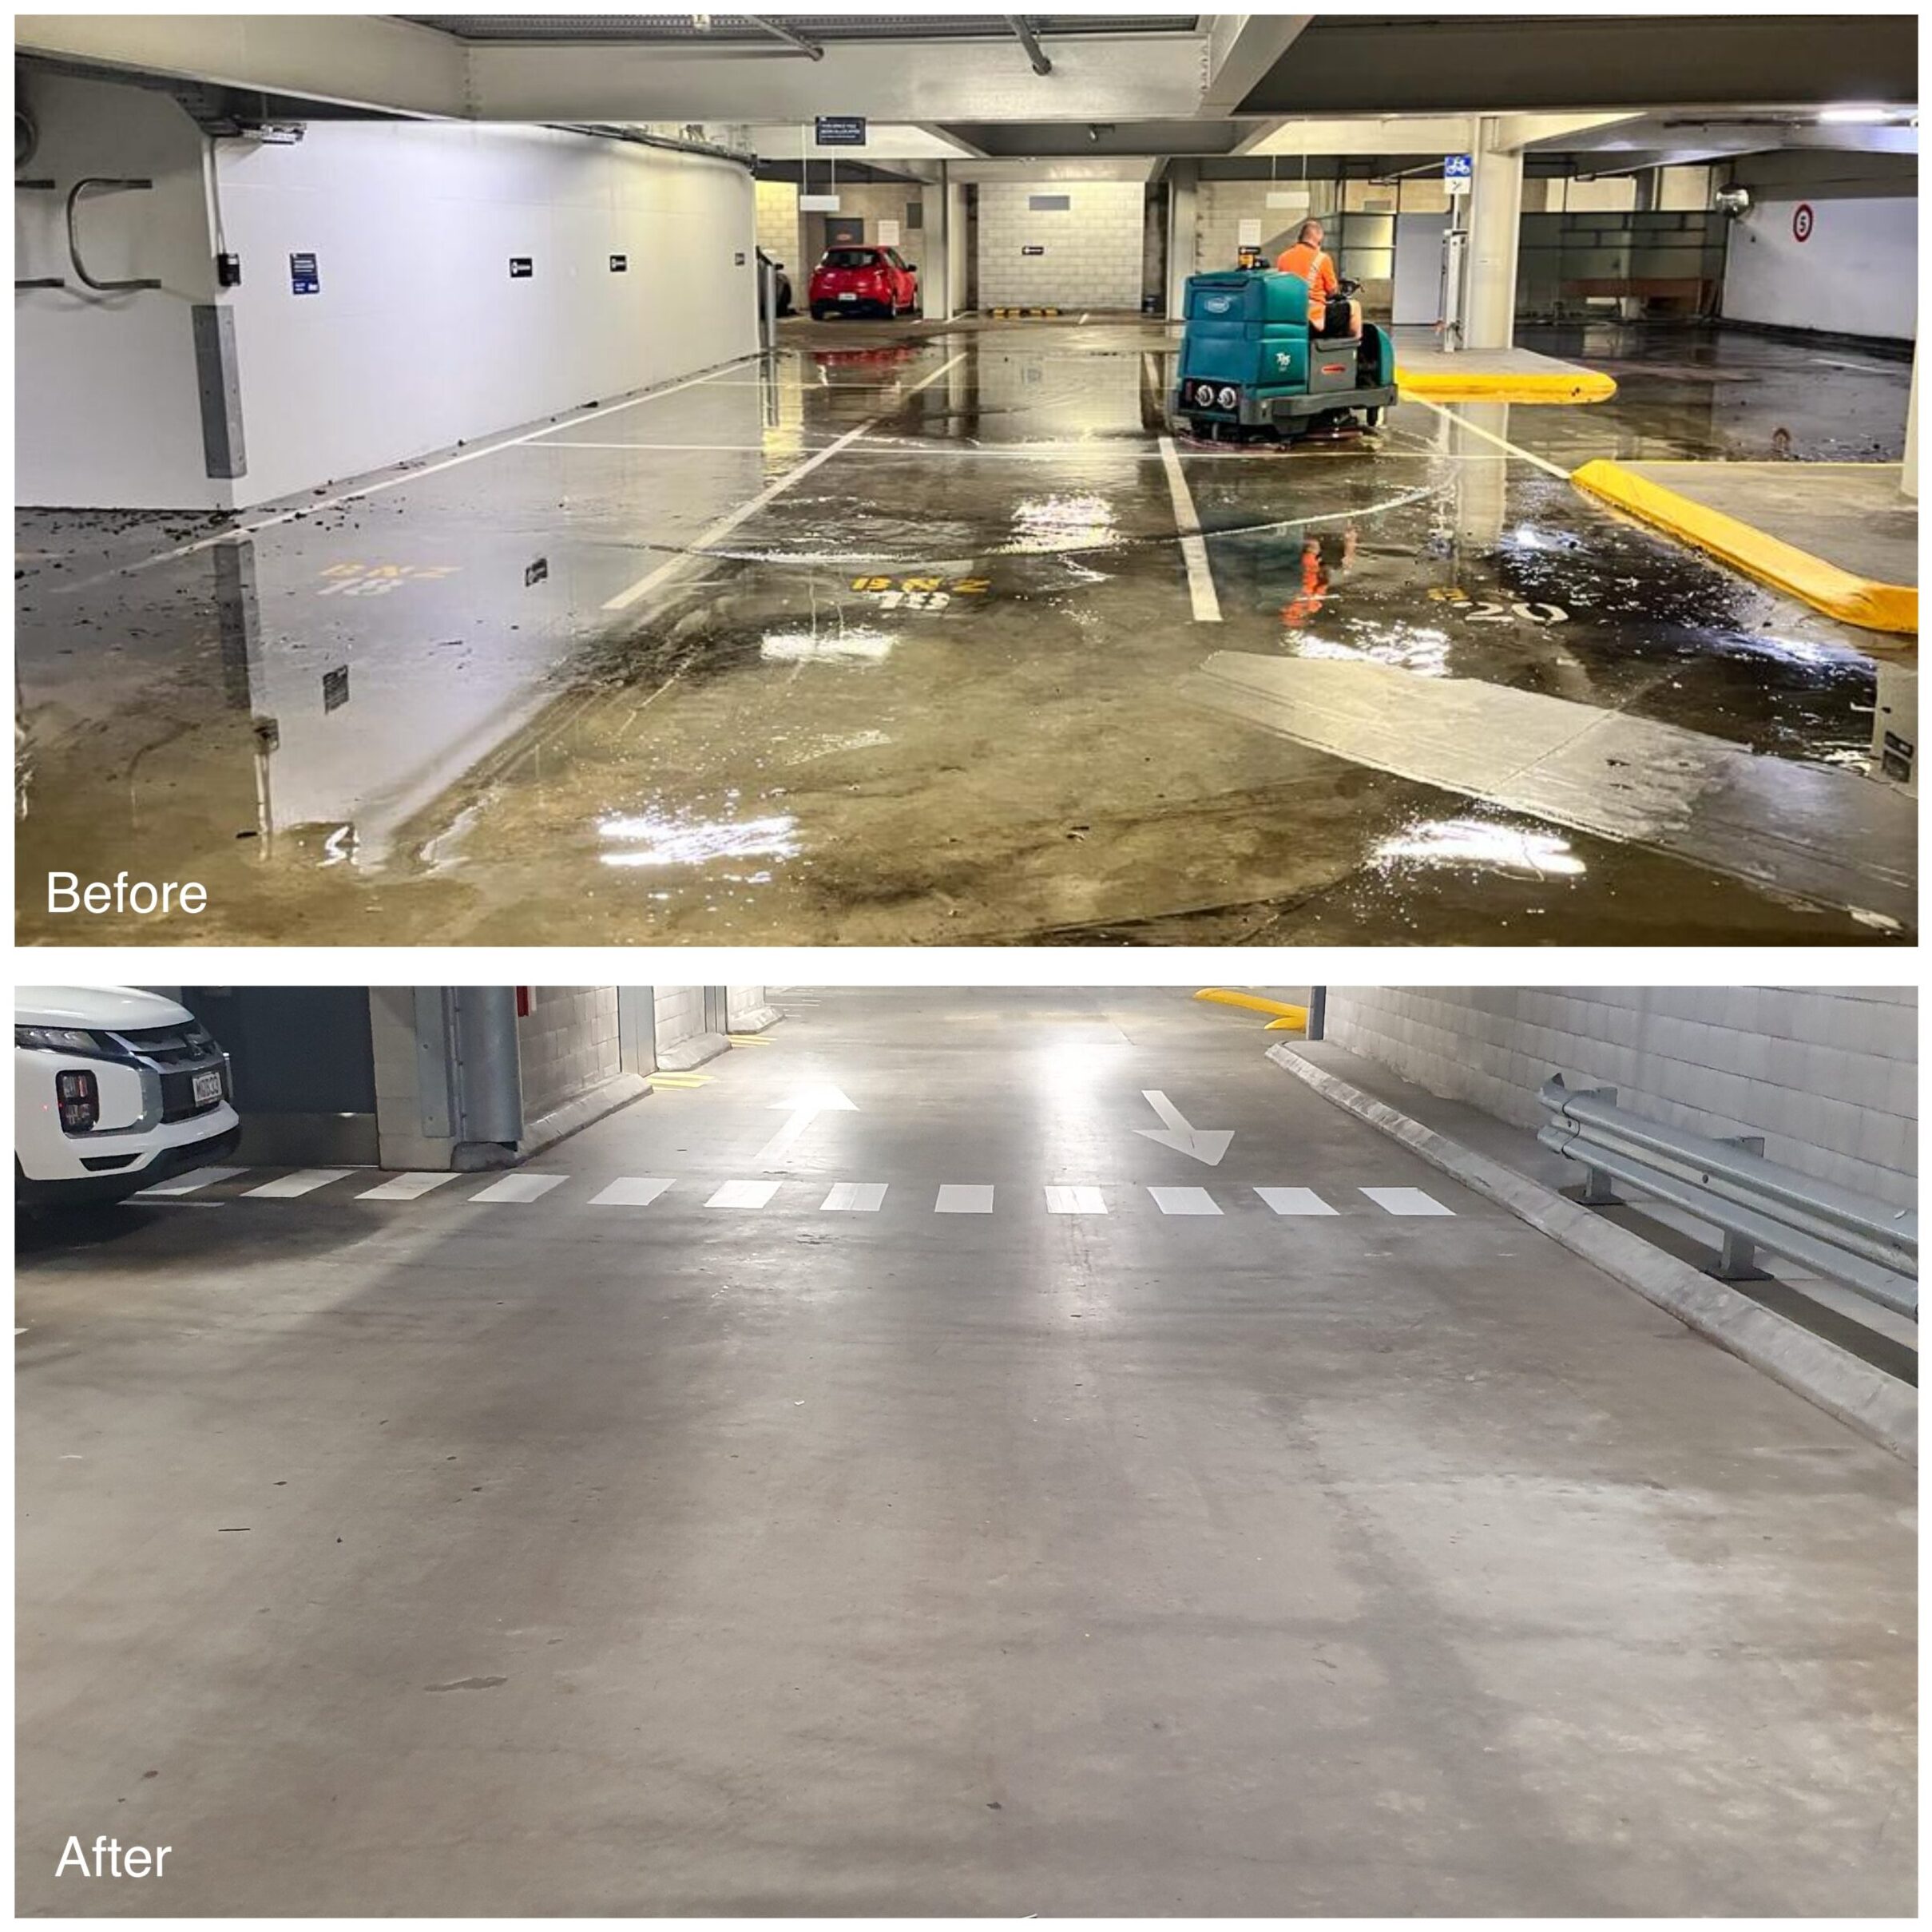 'Before' and 'after' pictures of a flooded carpark that has been cleaned